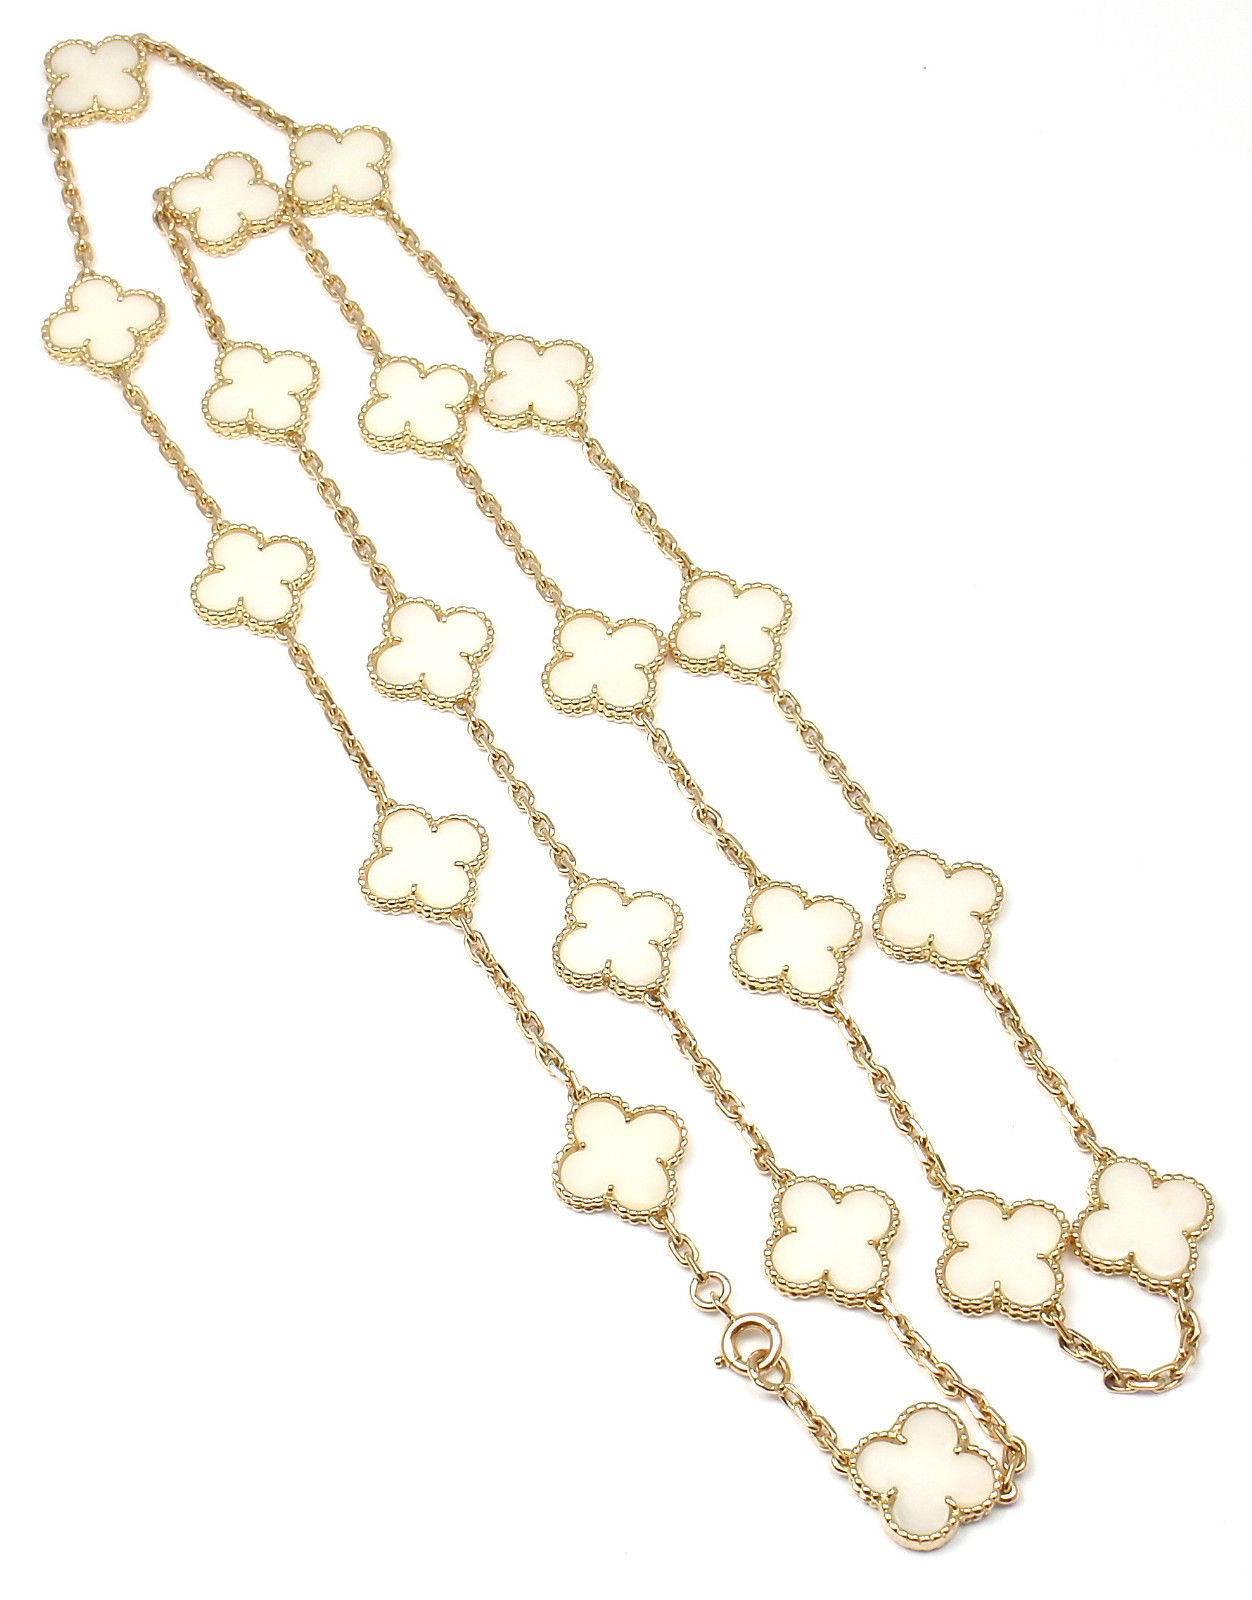 Van Cleef & Arpels Vintage White Coral 20 Motifs Alhambra Yellow Gold Necklace.
With 20 motifs of white coral alhambra stones 15mm each
This necklace comes with a Van Cleef & Arpels service paper and a box.

*** This is an extremely rare, early,